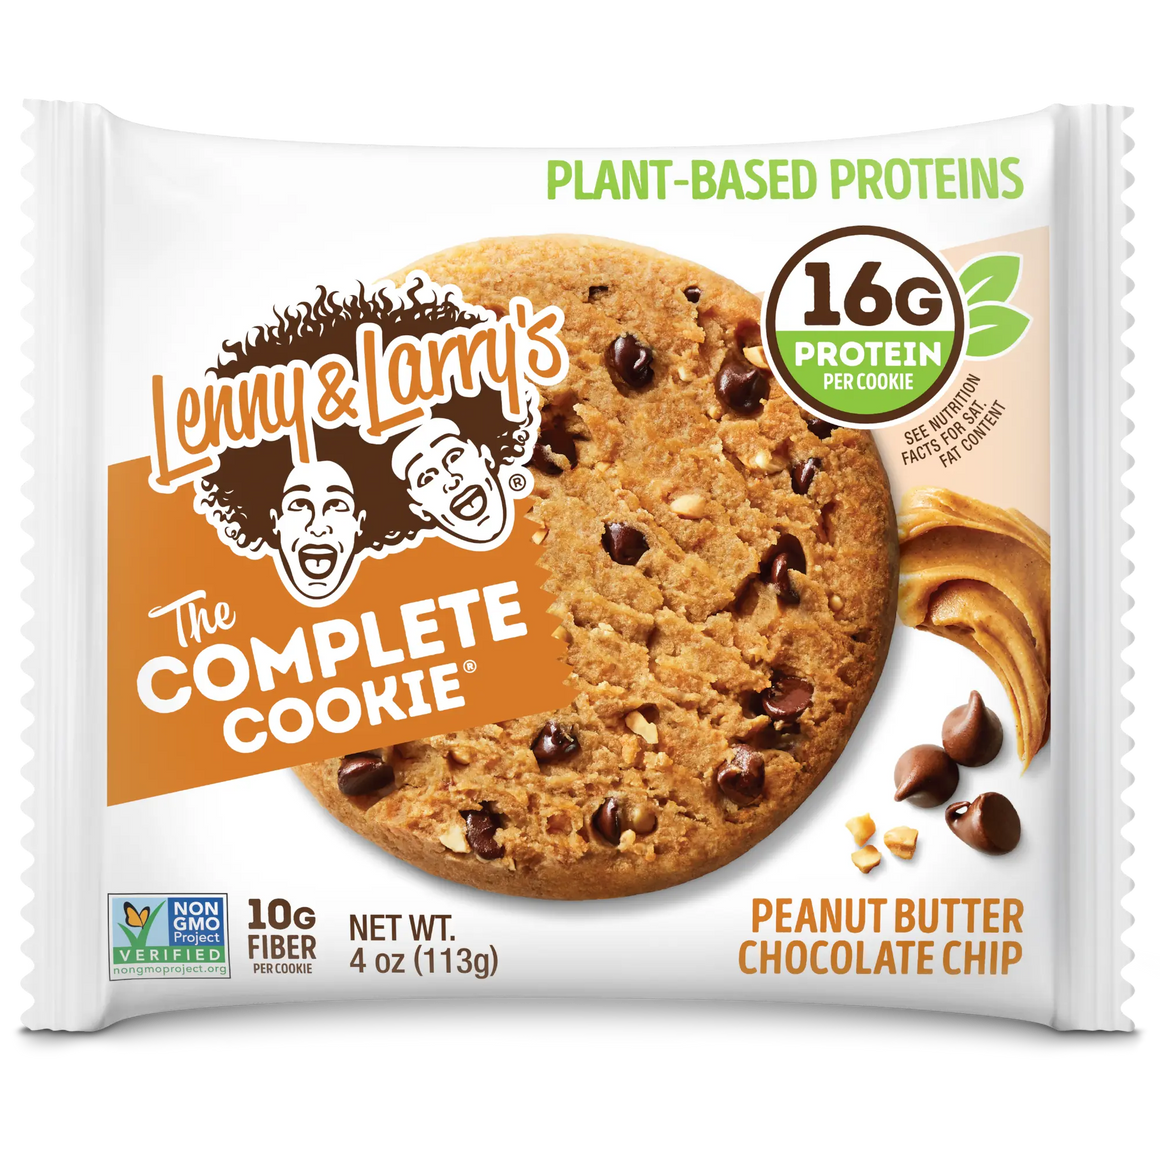 Lenny & Larry's Peanut Butter Chocolate Chip Complete Cookie, Plant Based Proteins, Non GMO,113gm Lenny & Larry's